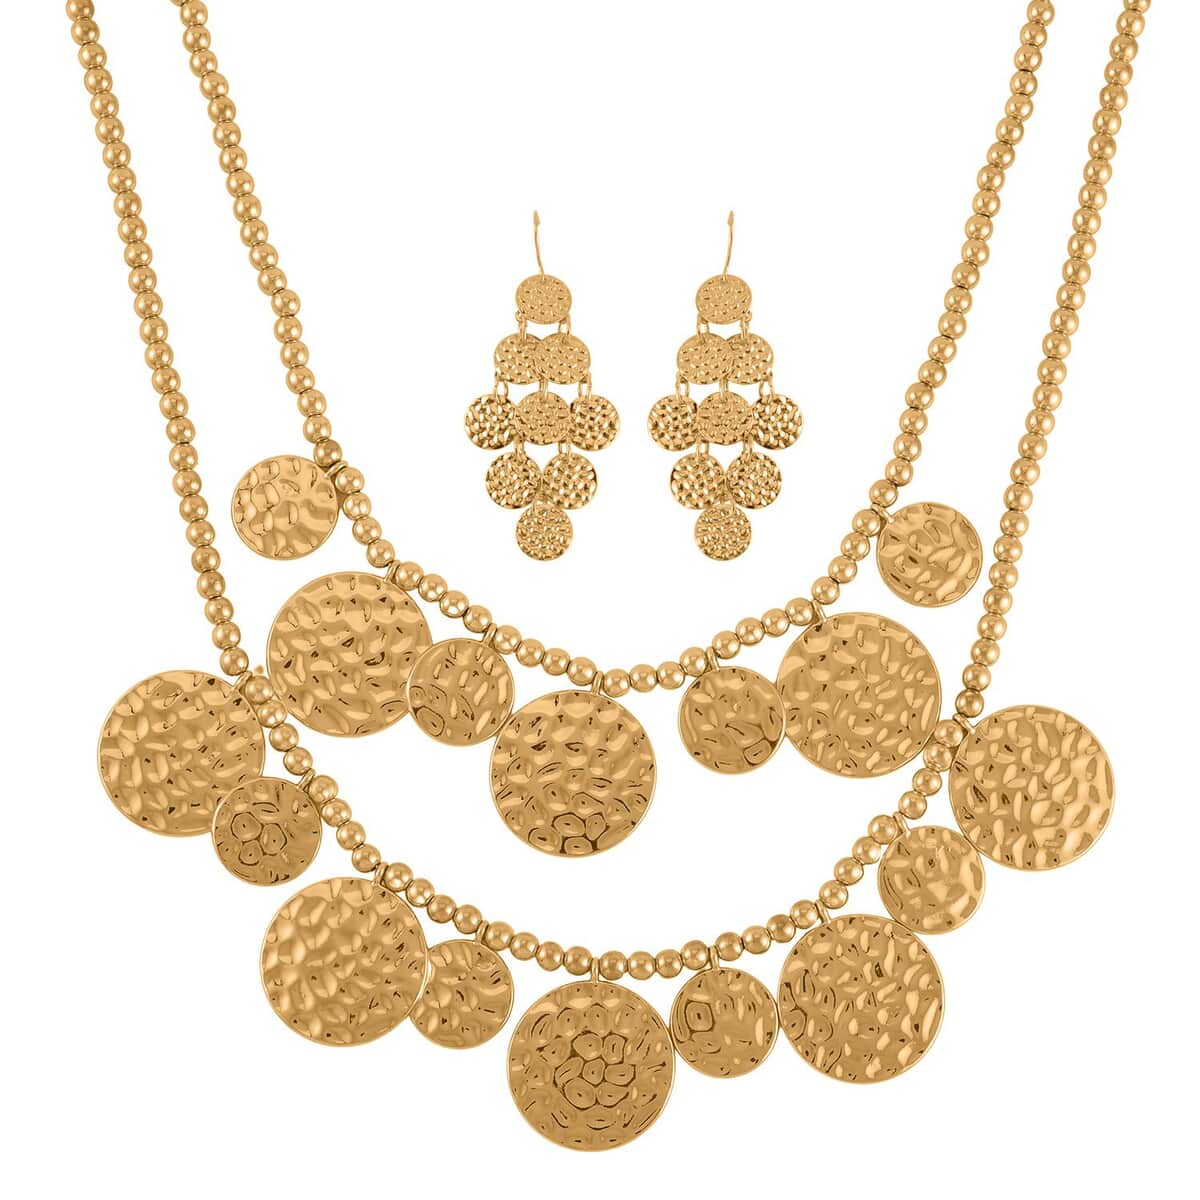 Hammer Textured Necklace 18-22 Inches and Earrings in Goldtone image number 0